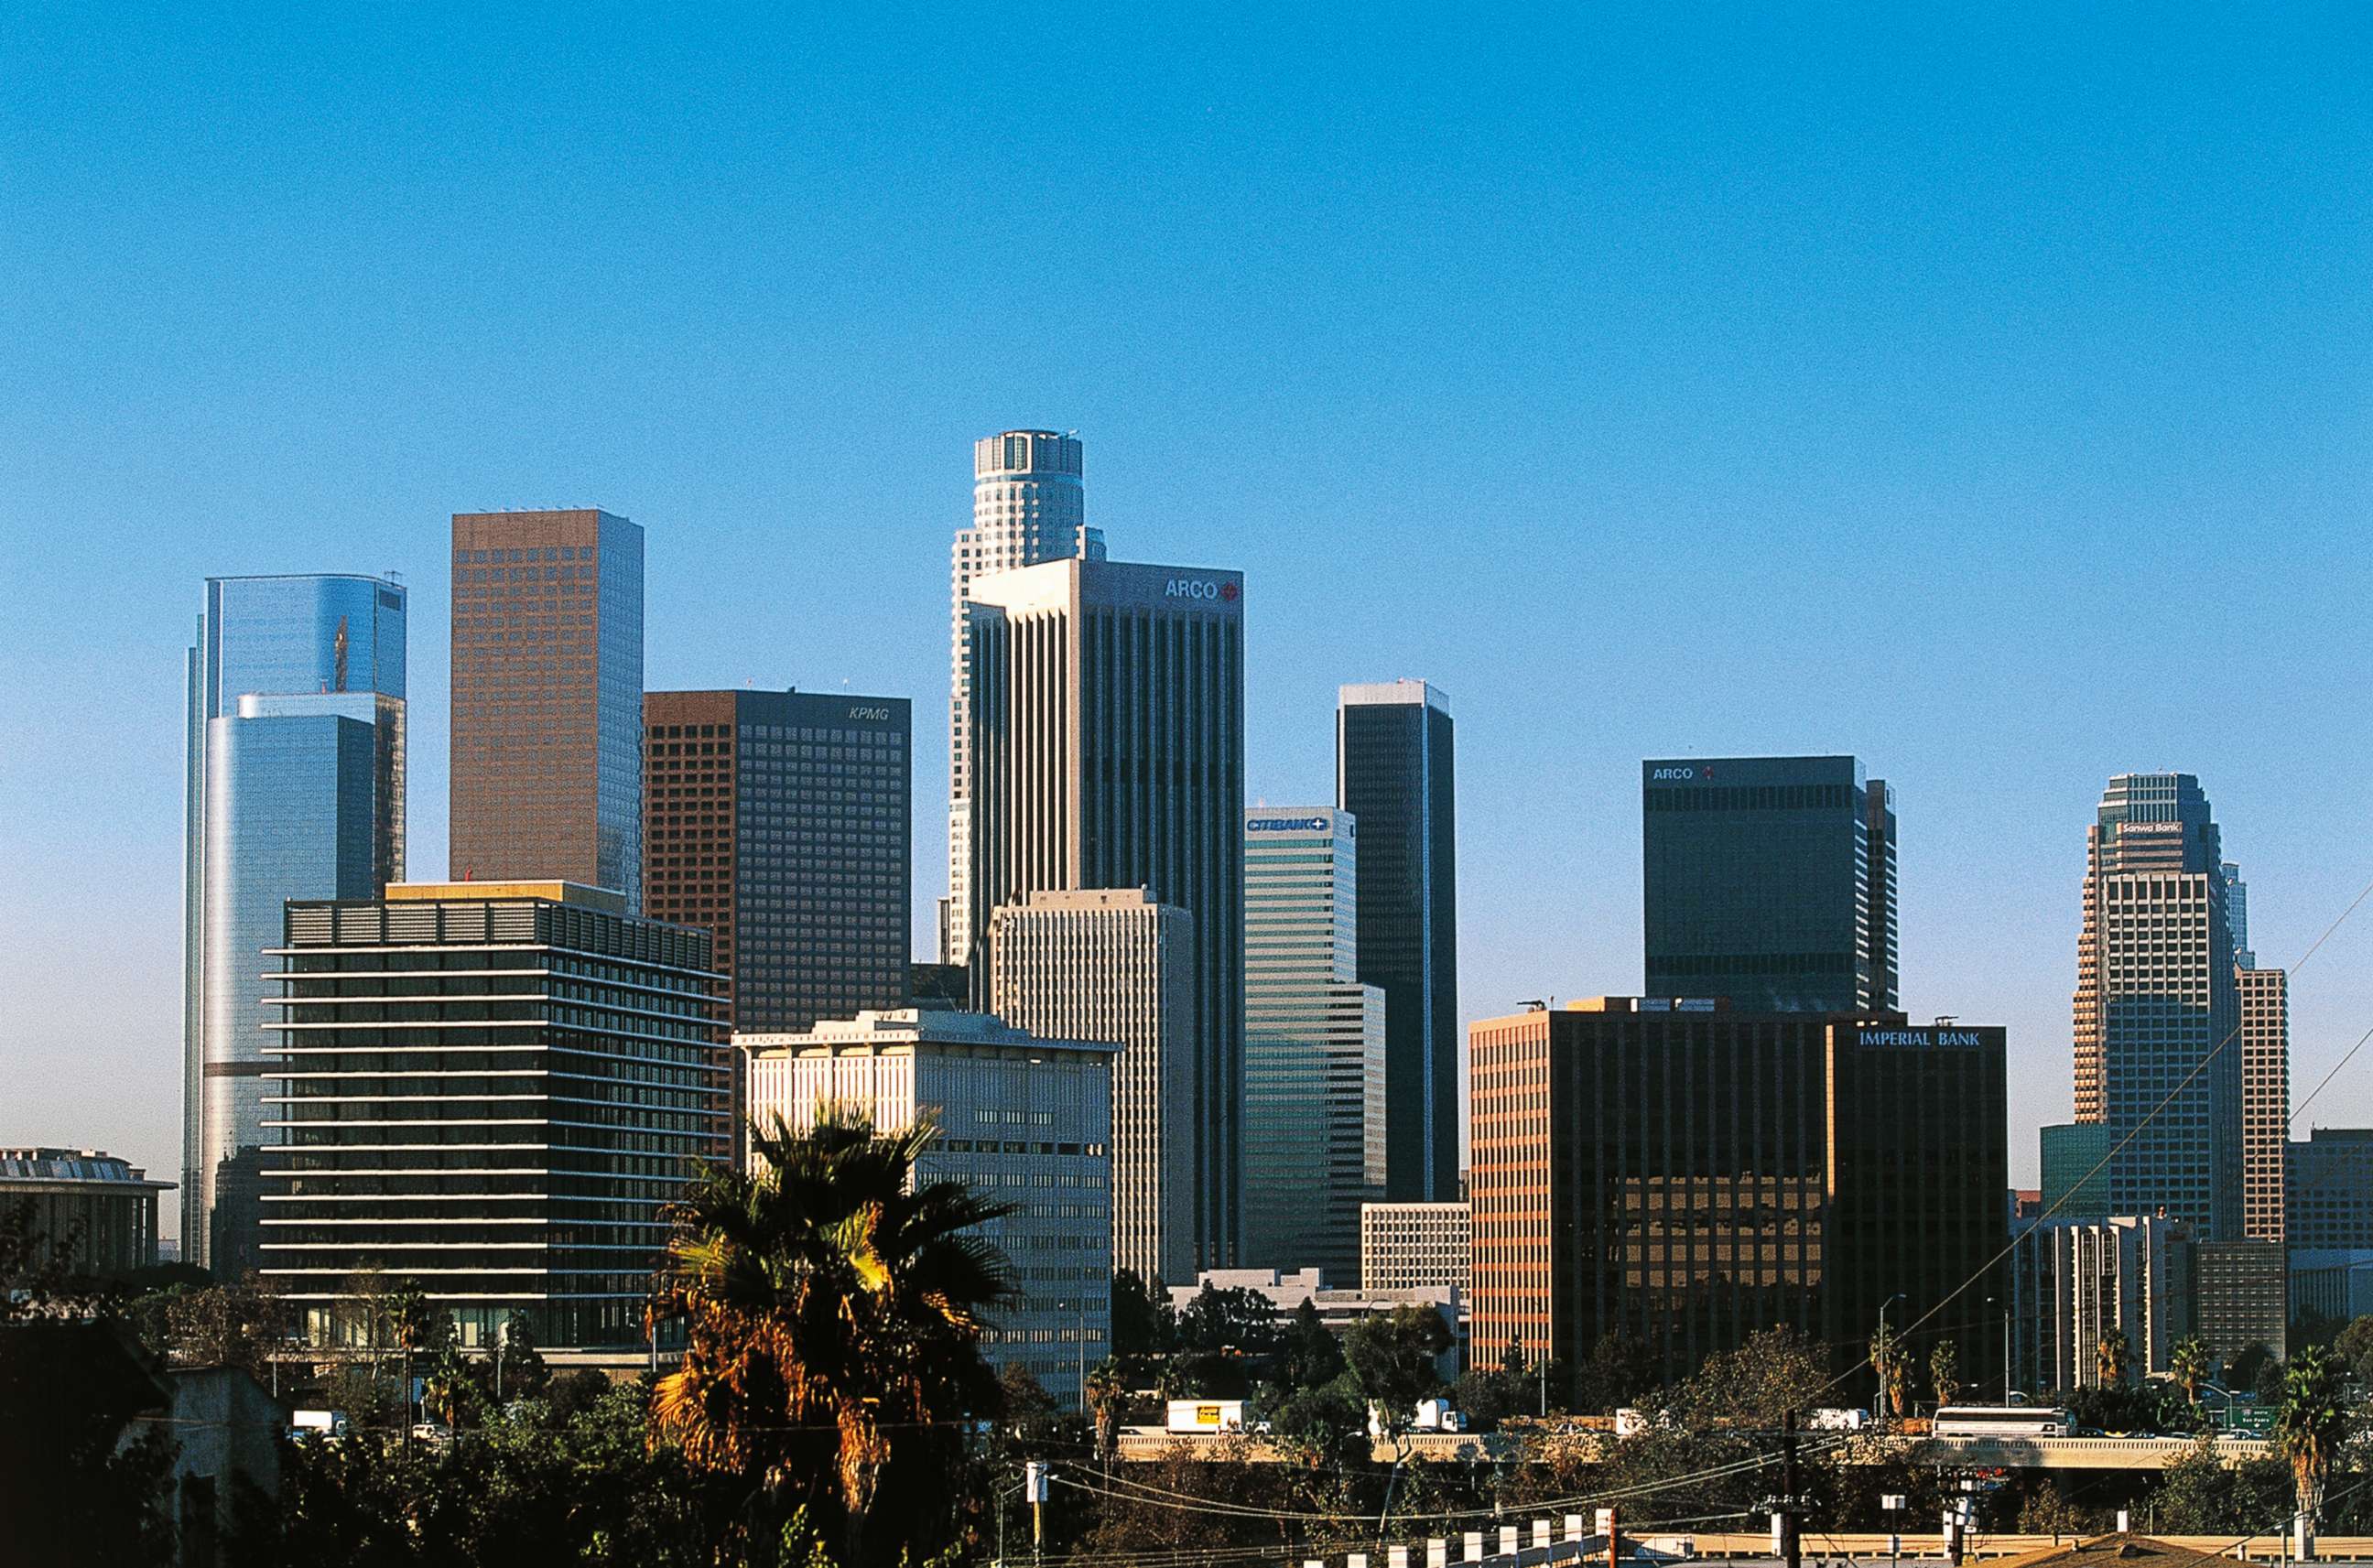 PHOTO: A view of the skyscrapers of downtown Los Angeles, the administrative and financial districts is captured.